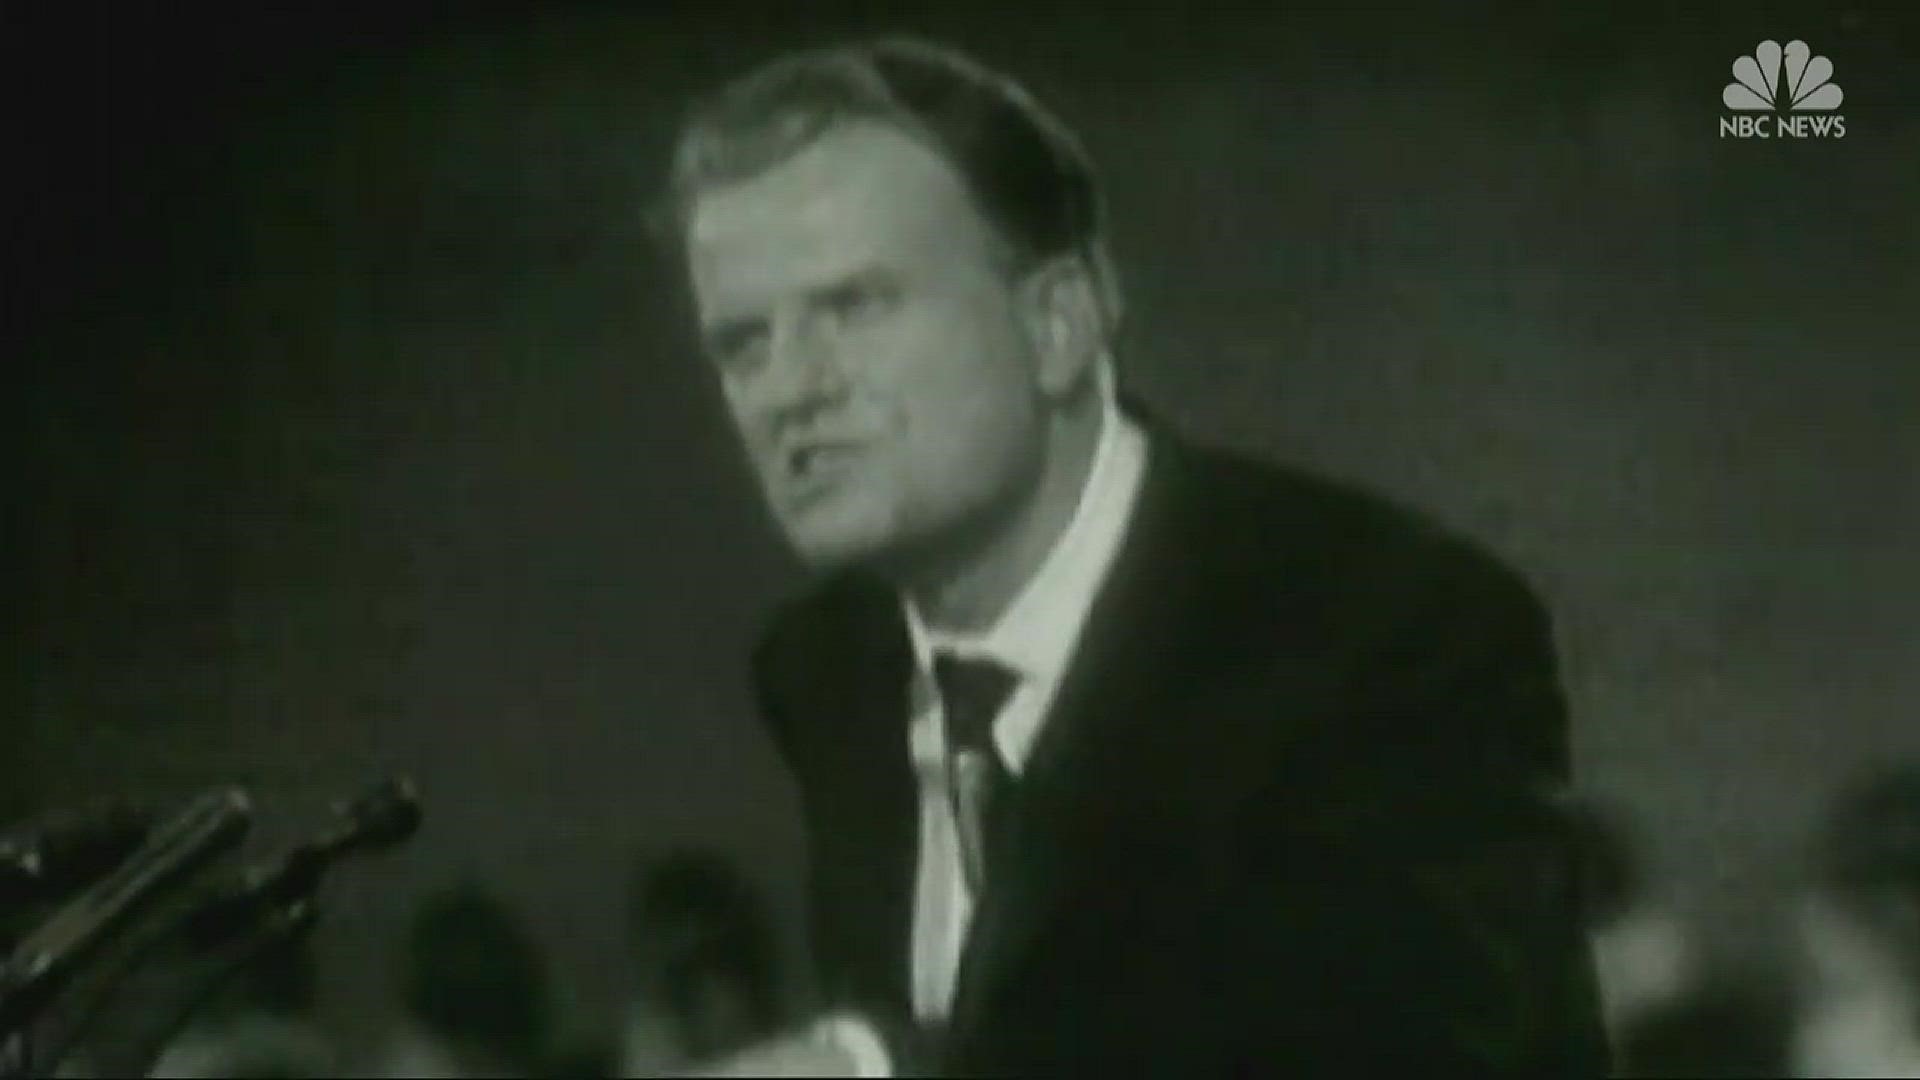 The body of the late Reverend Billy Graham will lie in honor at the U.S. Capitol building prior to his burial next week. NBC's Blayne Alexander reports.